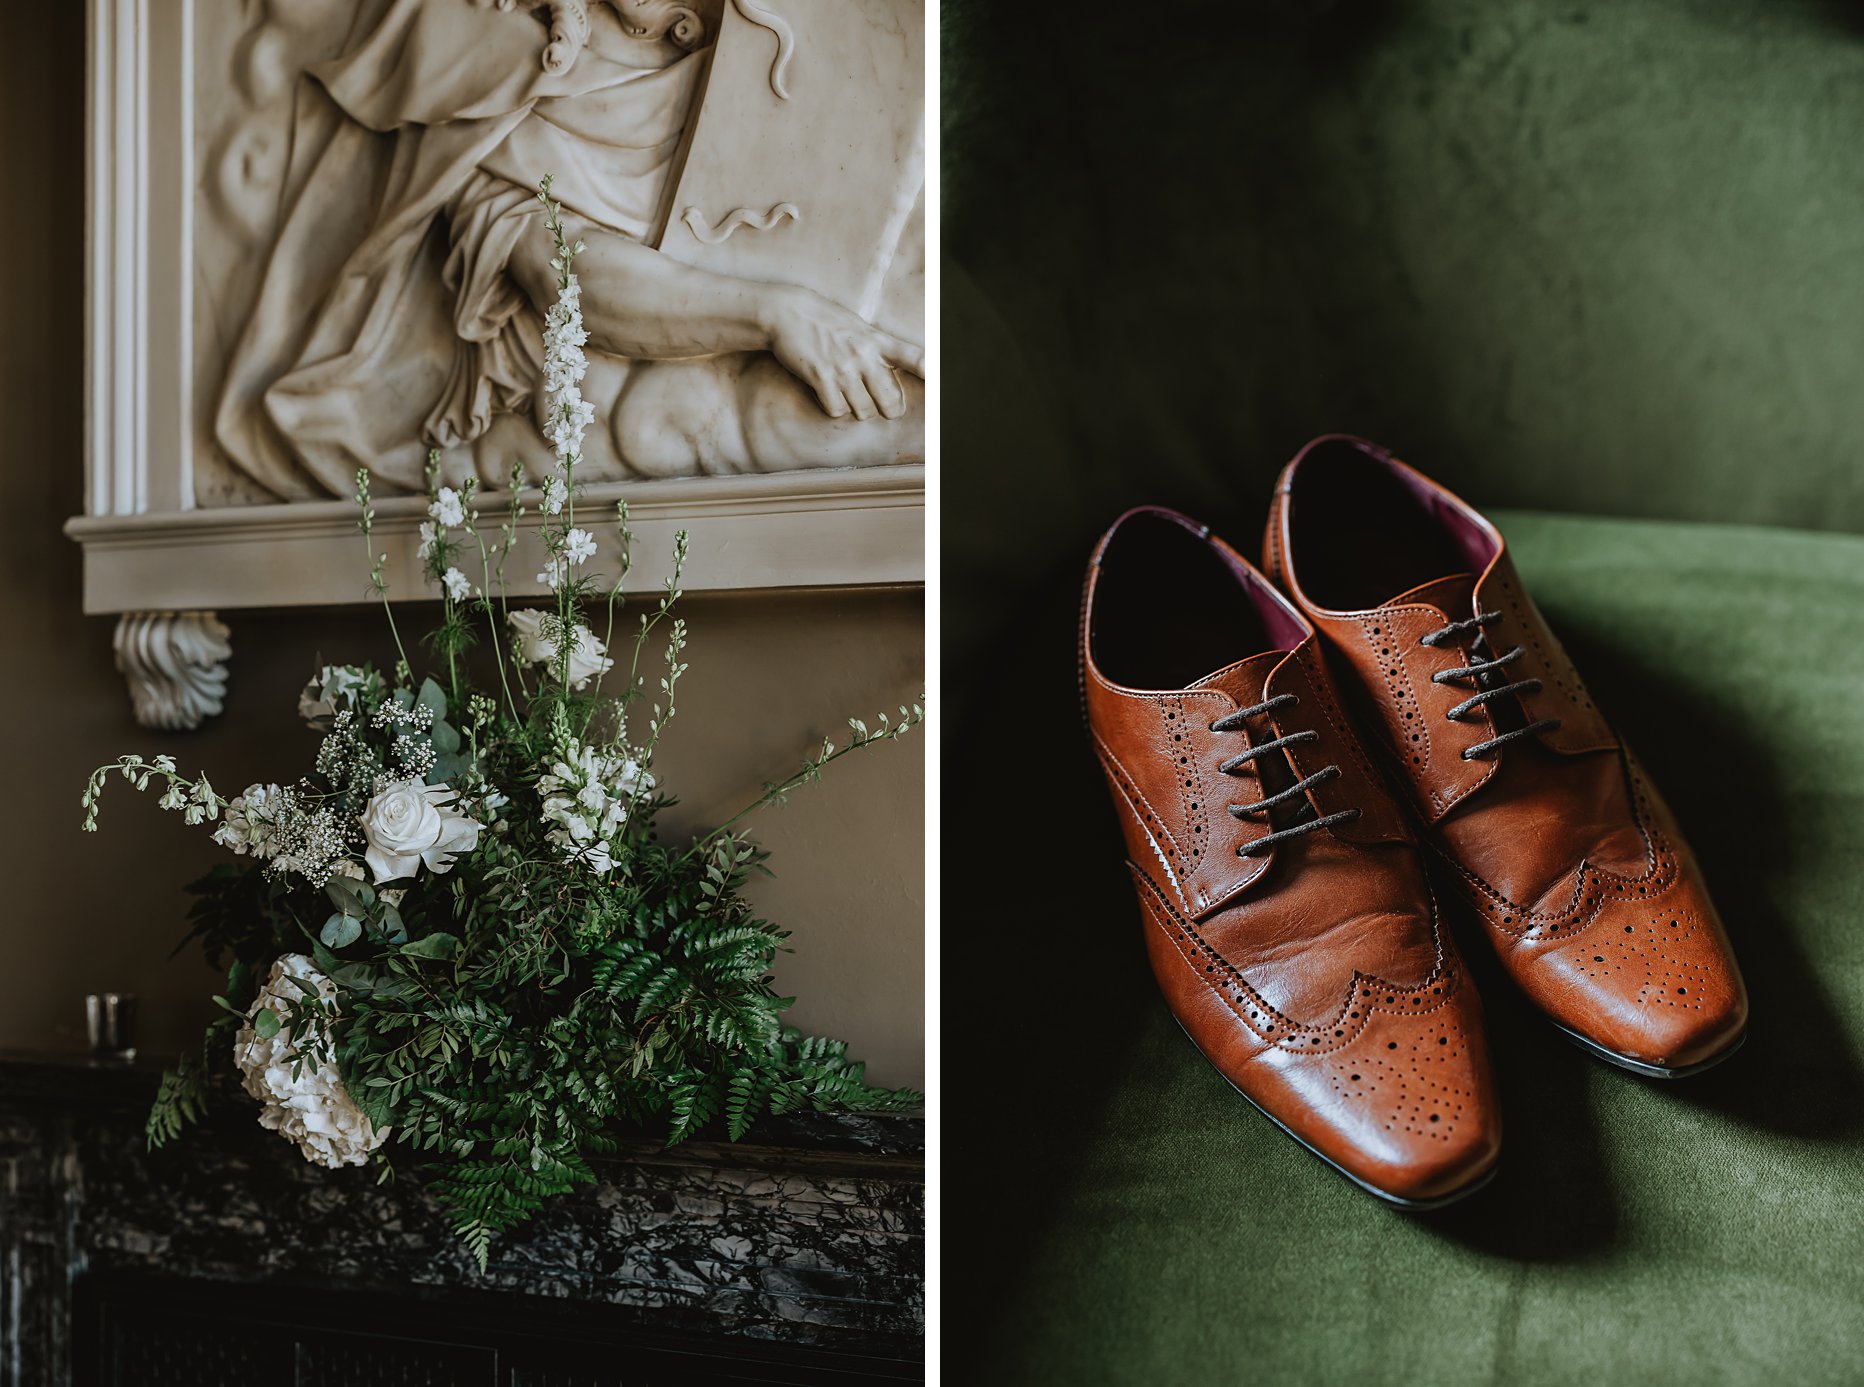 First image shows a green and white floral centrepiece on top of a fireplace in the entrance of Saltmarshe Hall. The second photo is a pair of mens tan leather shoes on a green velvet sofa.